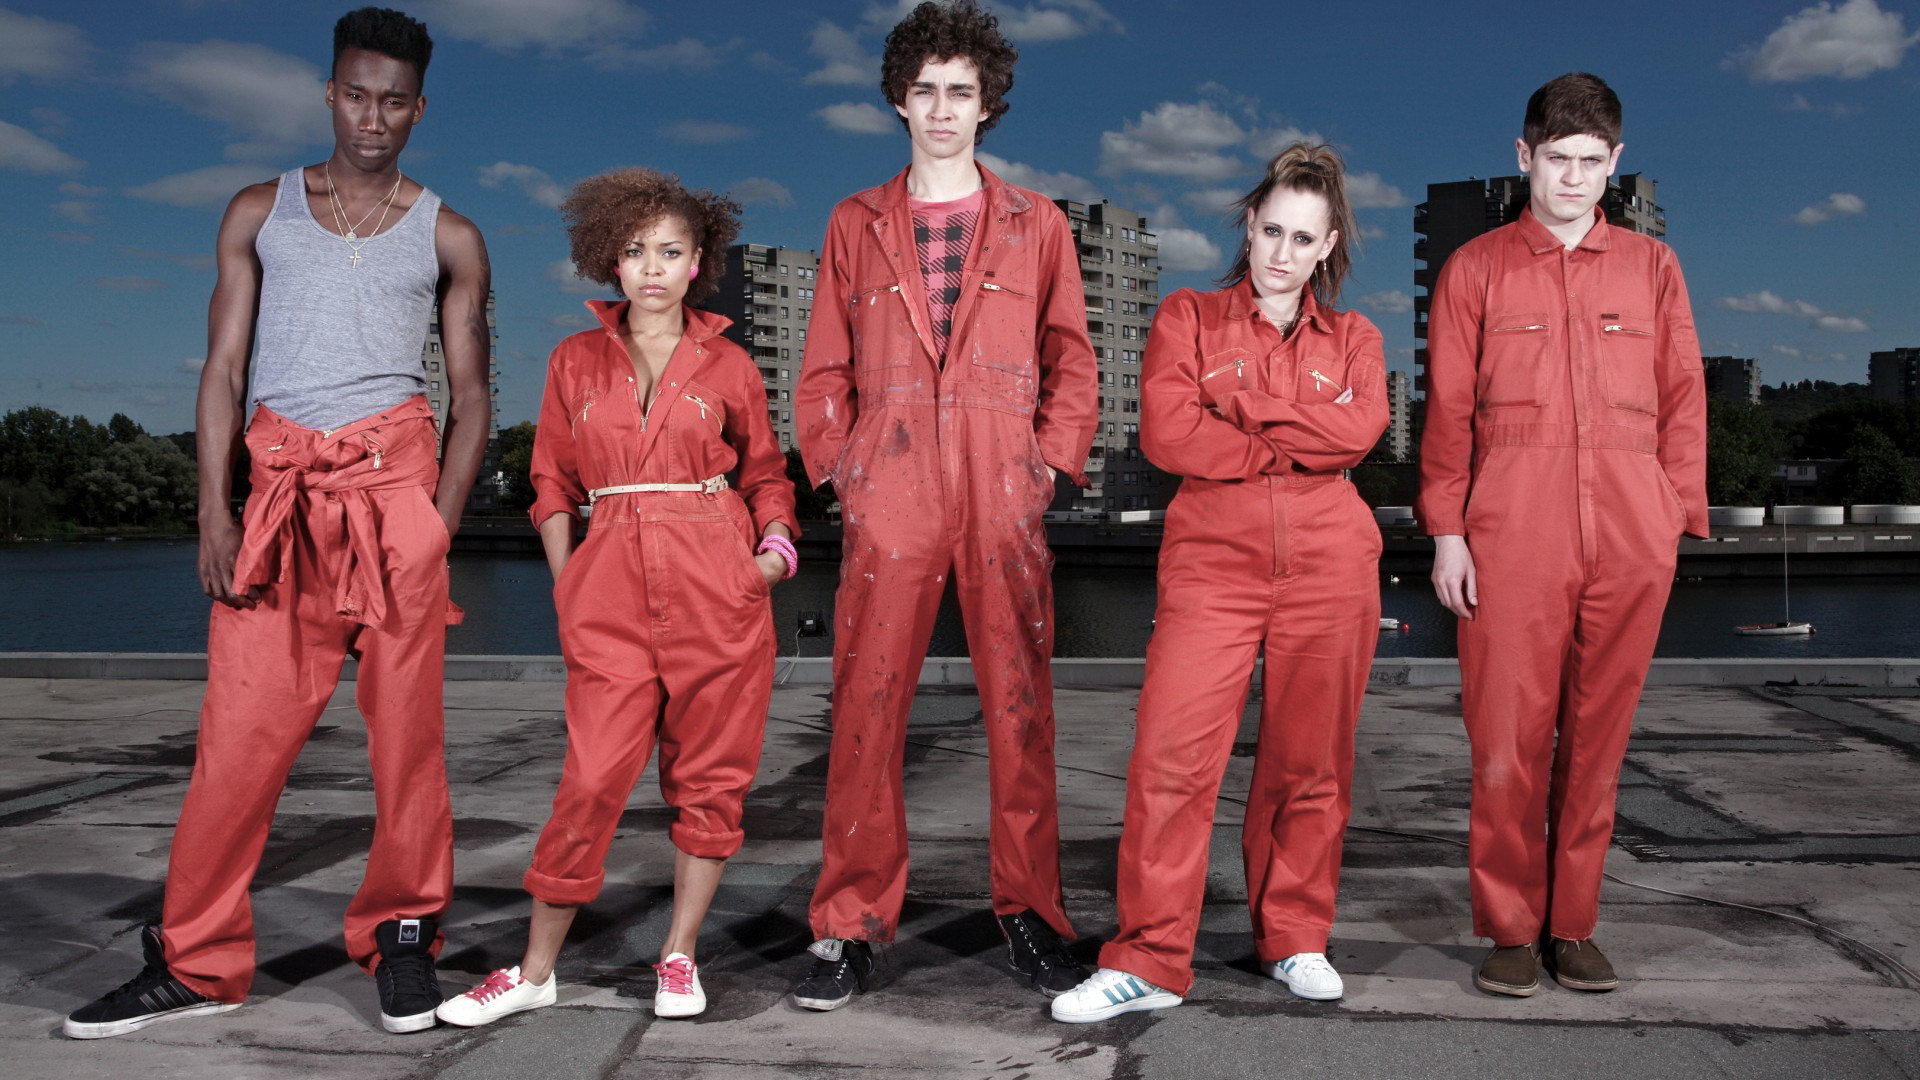 Free download Misfits serial background ID:194675 hd 1920x1080 for PC